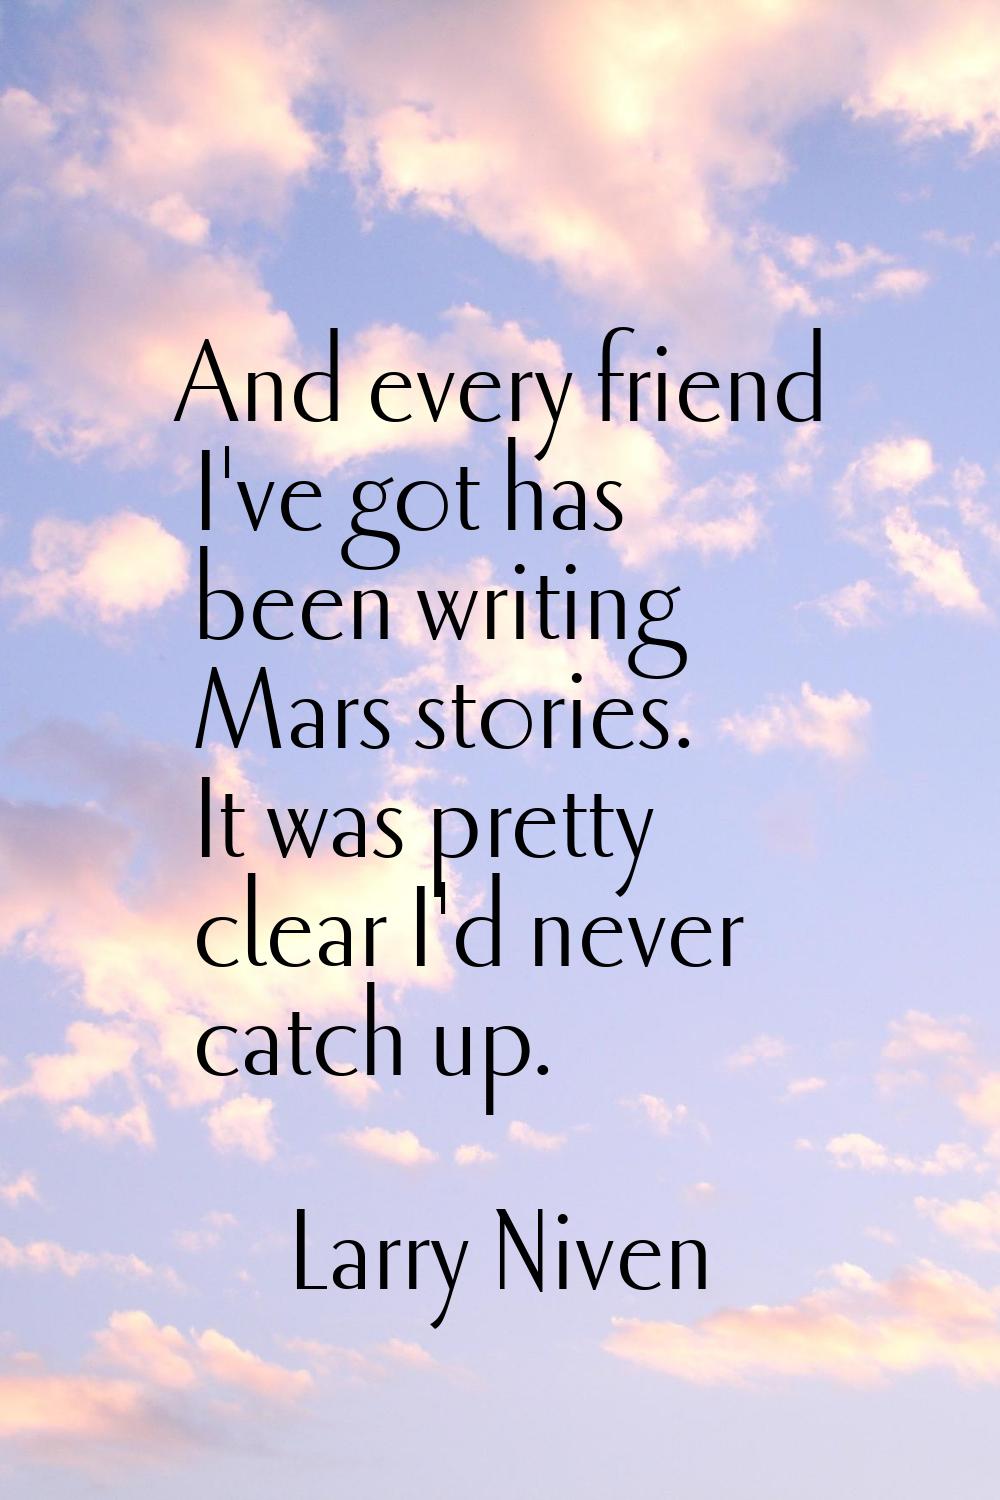 And every friend I've got has been writing Mars stories. It was pretty clear I'd never catch up.